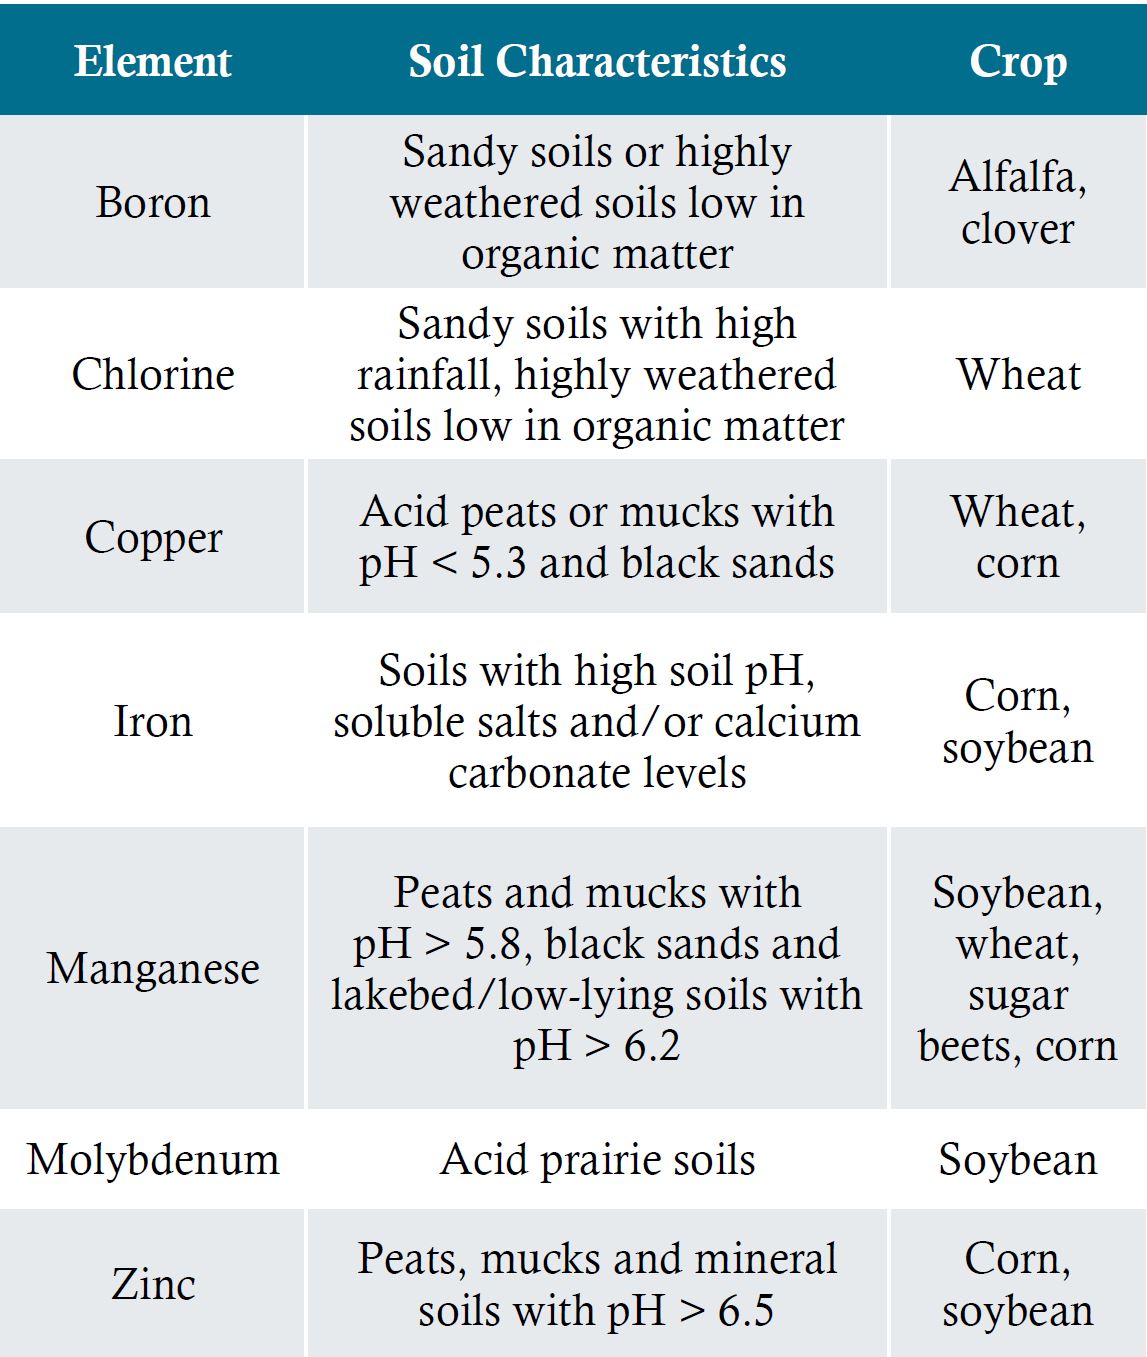 Soil conditions which may lead to micronutrient deficiencies for various crops